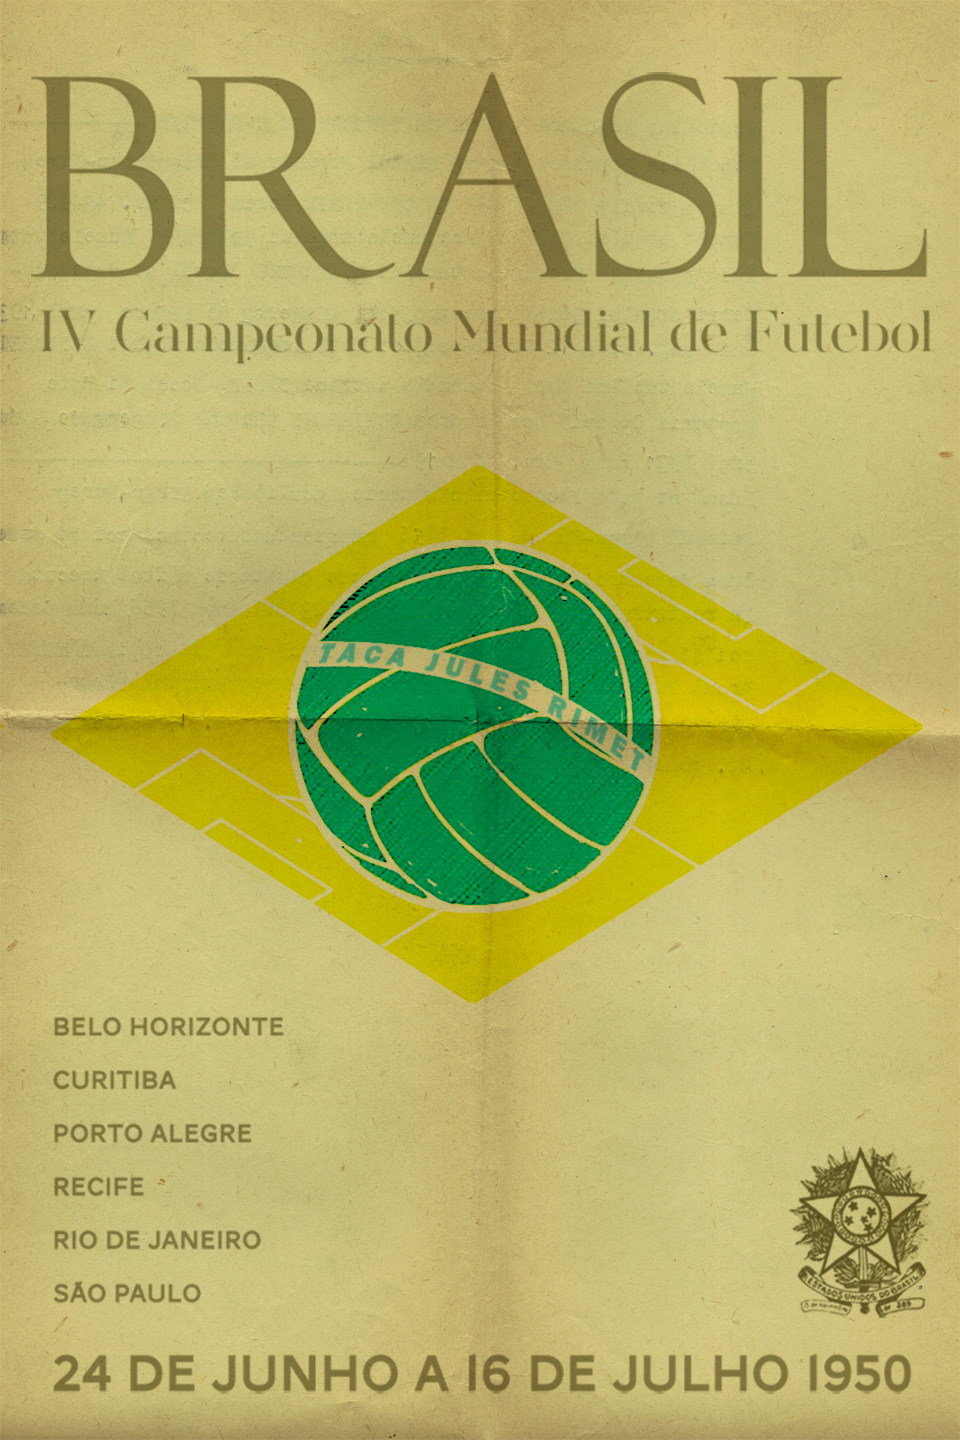 world cup Brasil 2014 world cupposters posters Sport Posters